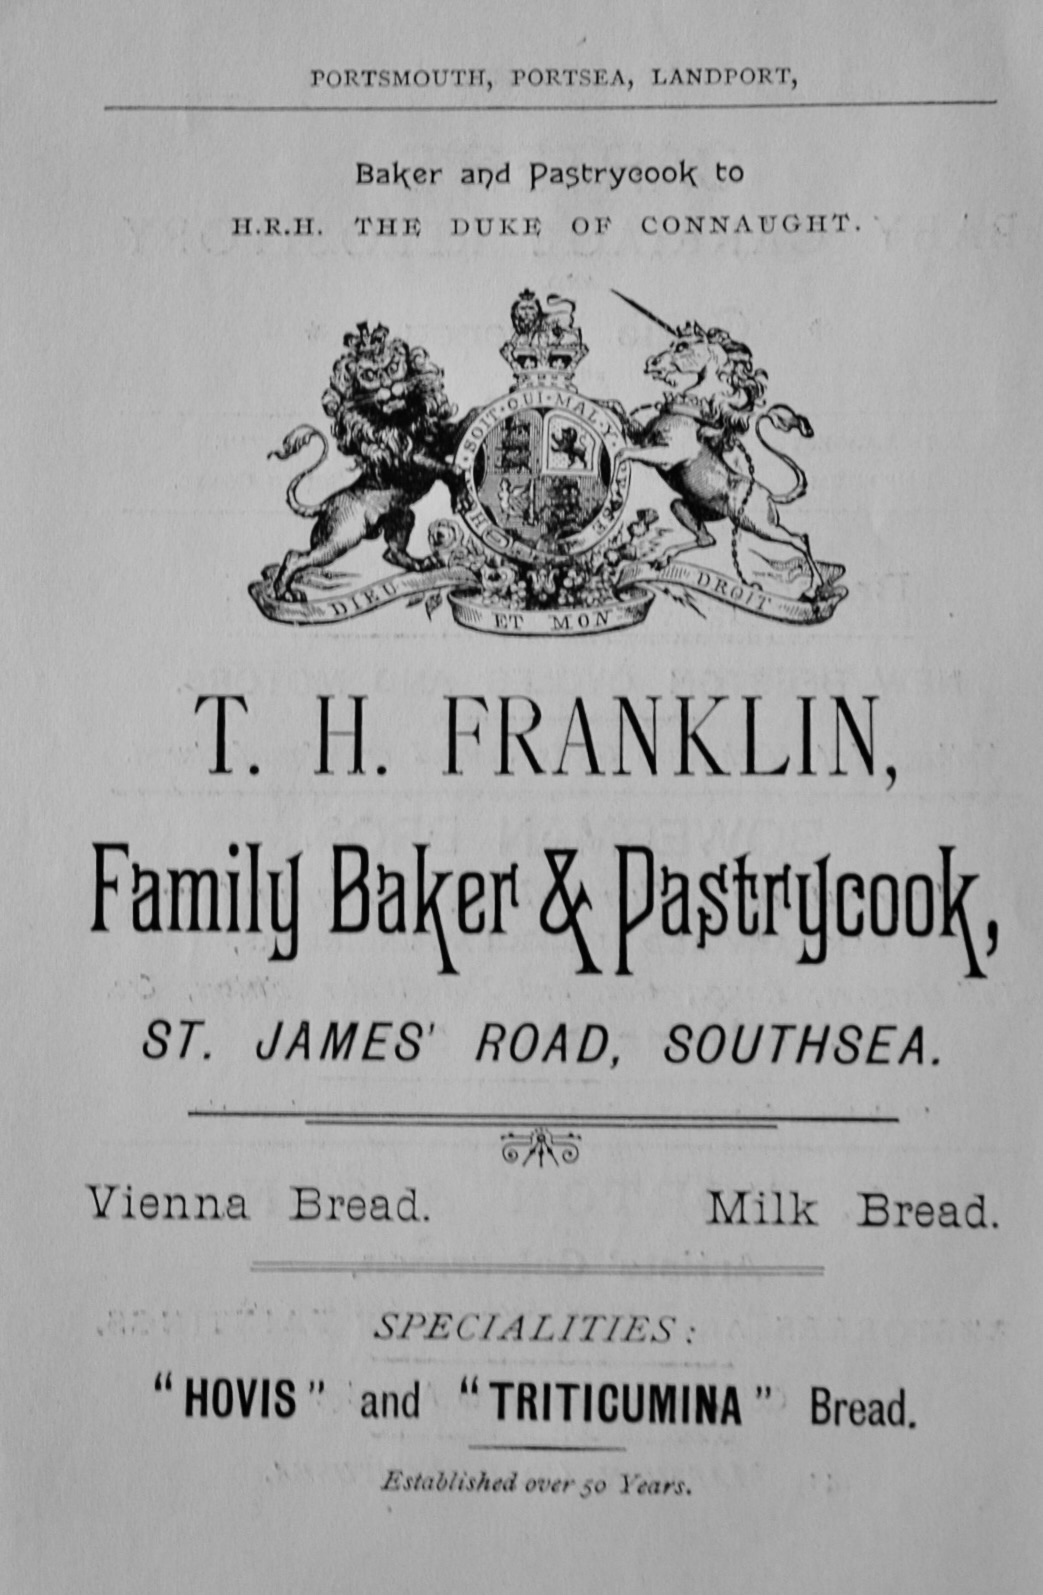 T. H. Franklin, Family Baker & Pastrycook, St. James' Road, Southsea.  1897